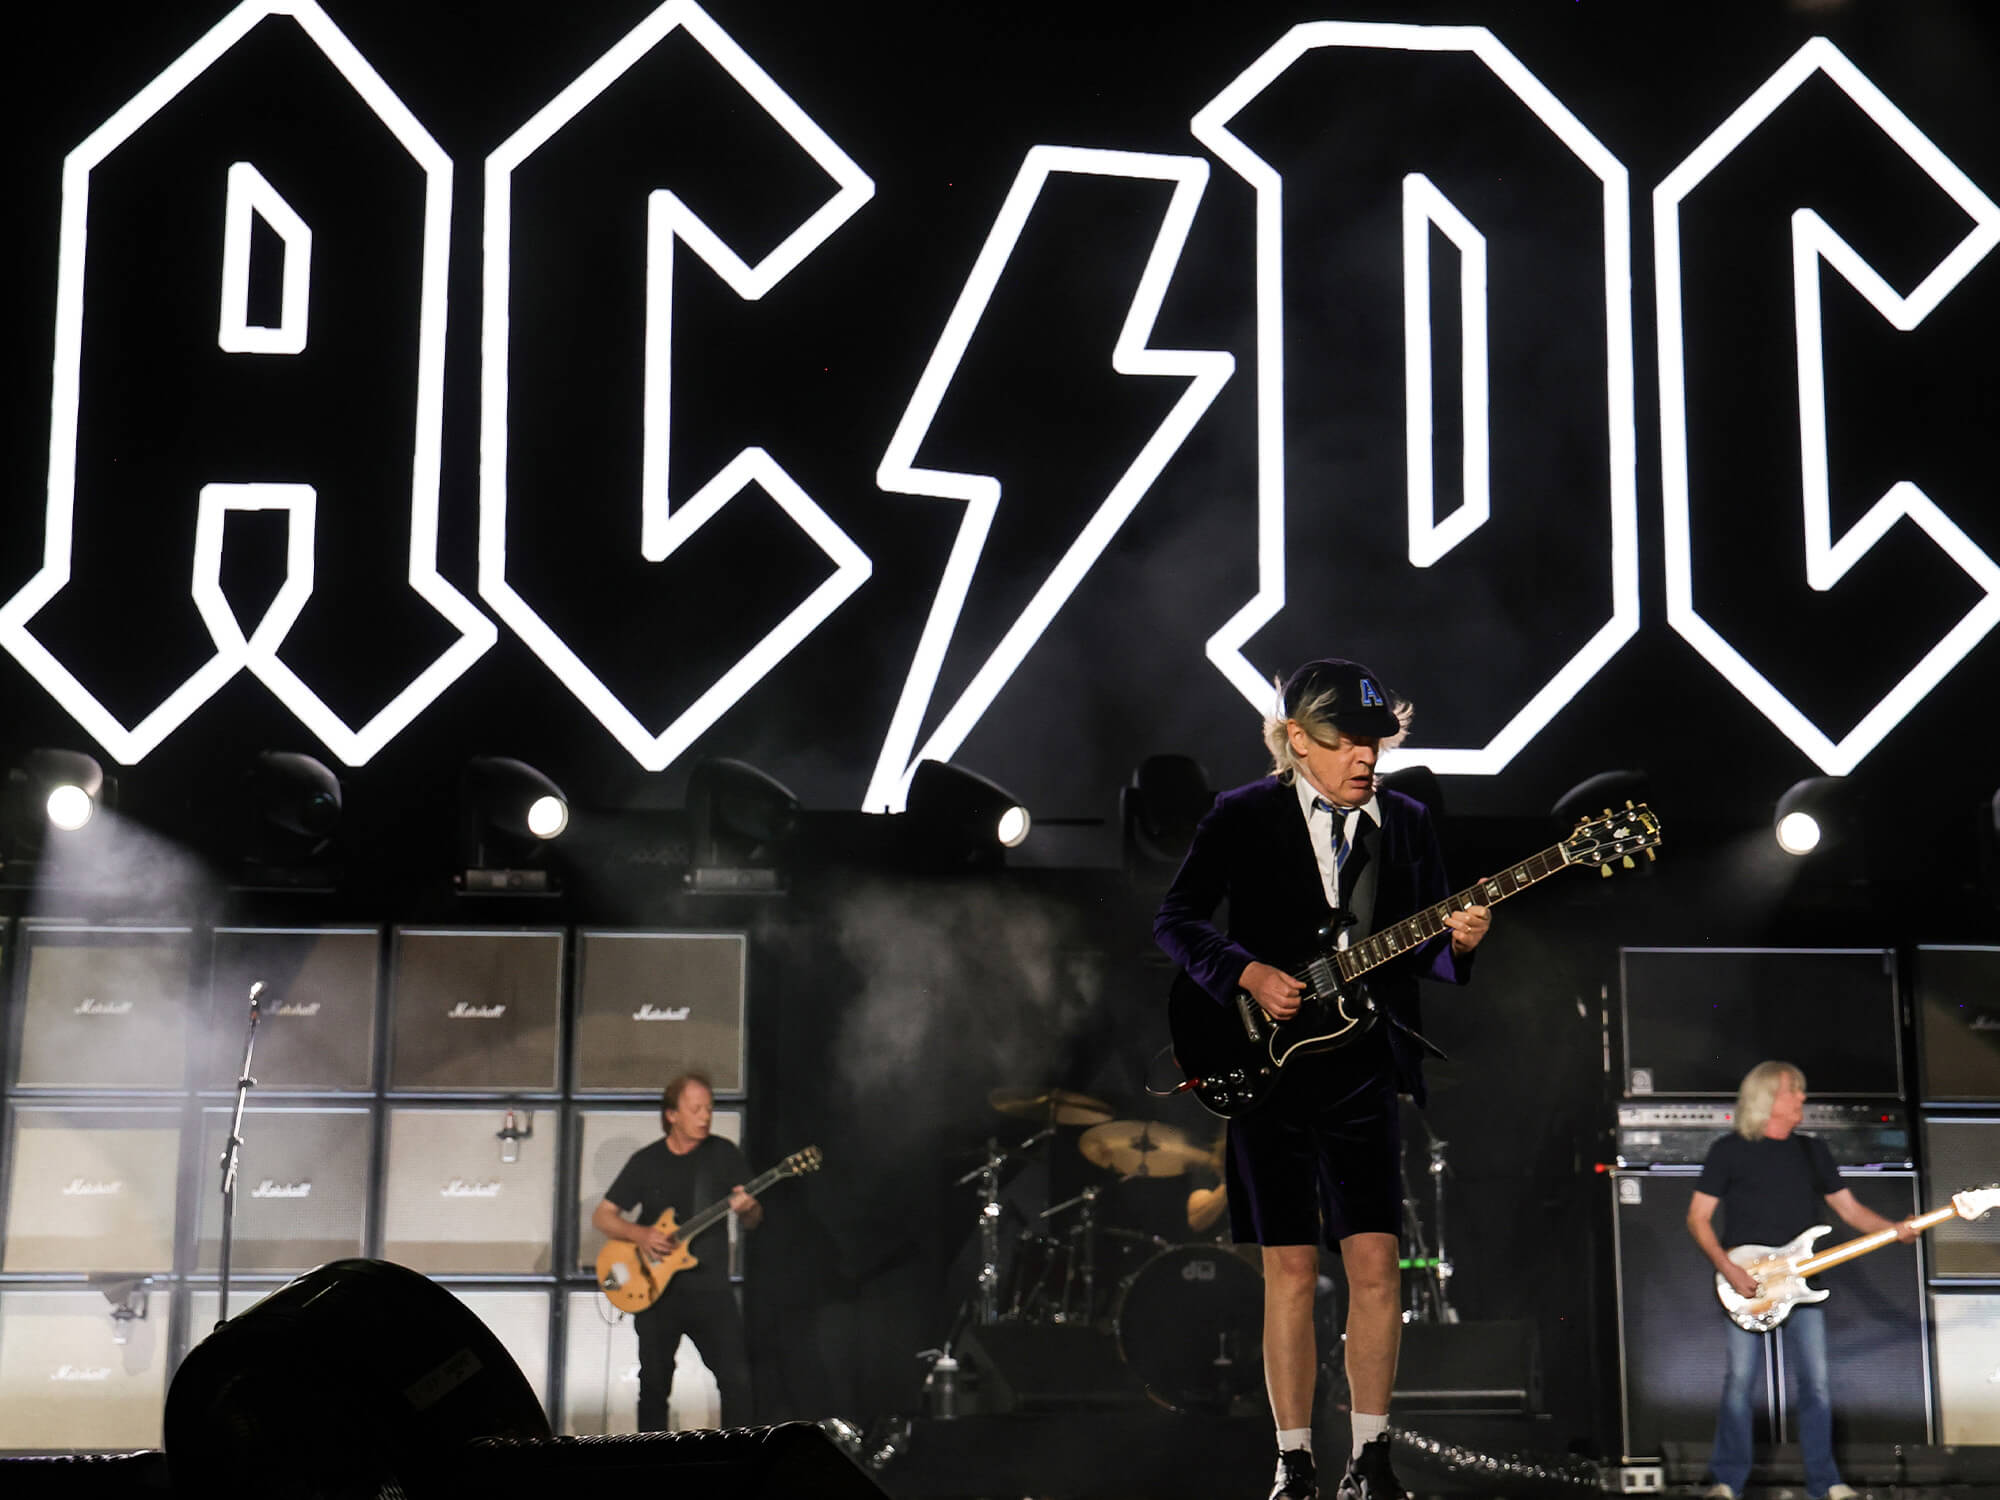 Watch: AC/DC take to the stage at Power Trip for first live show